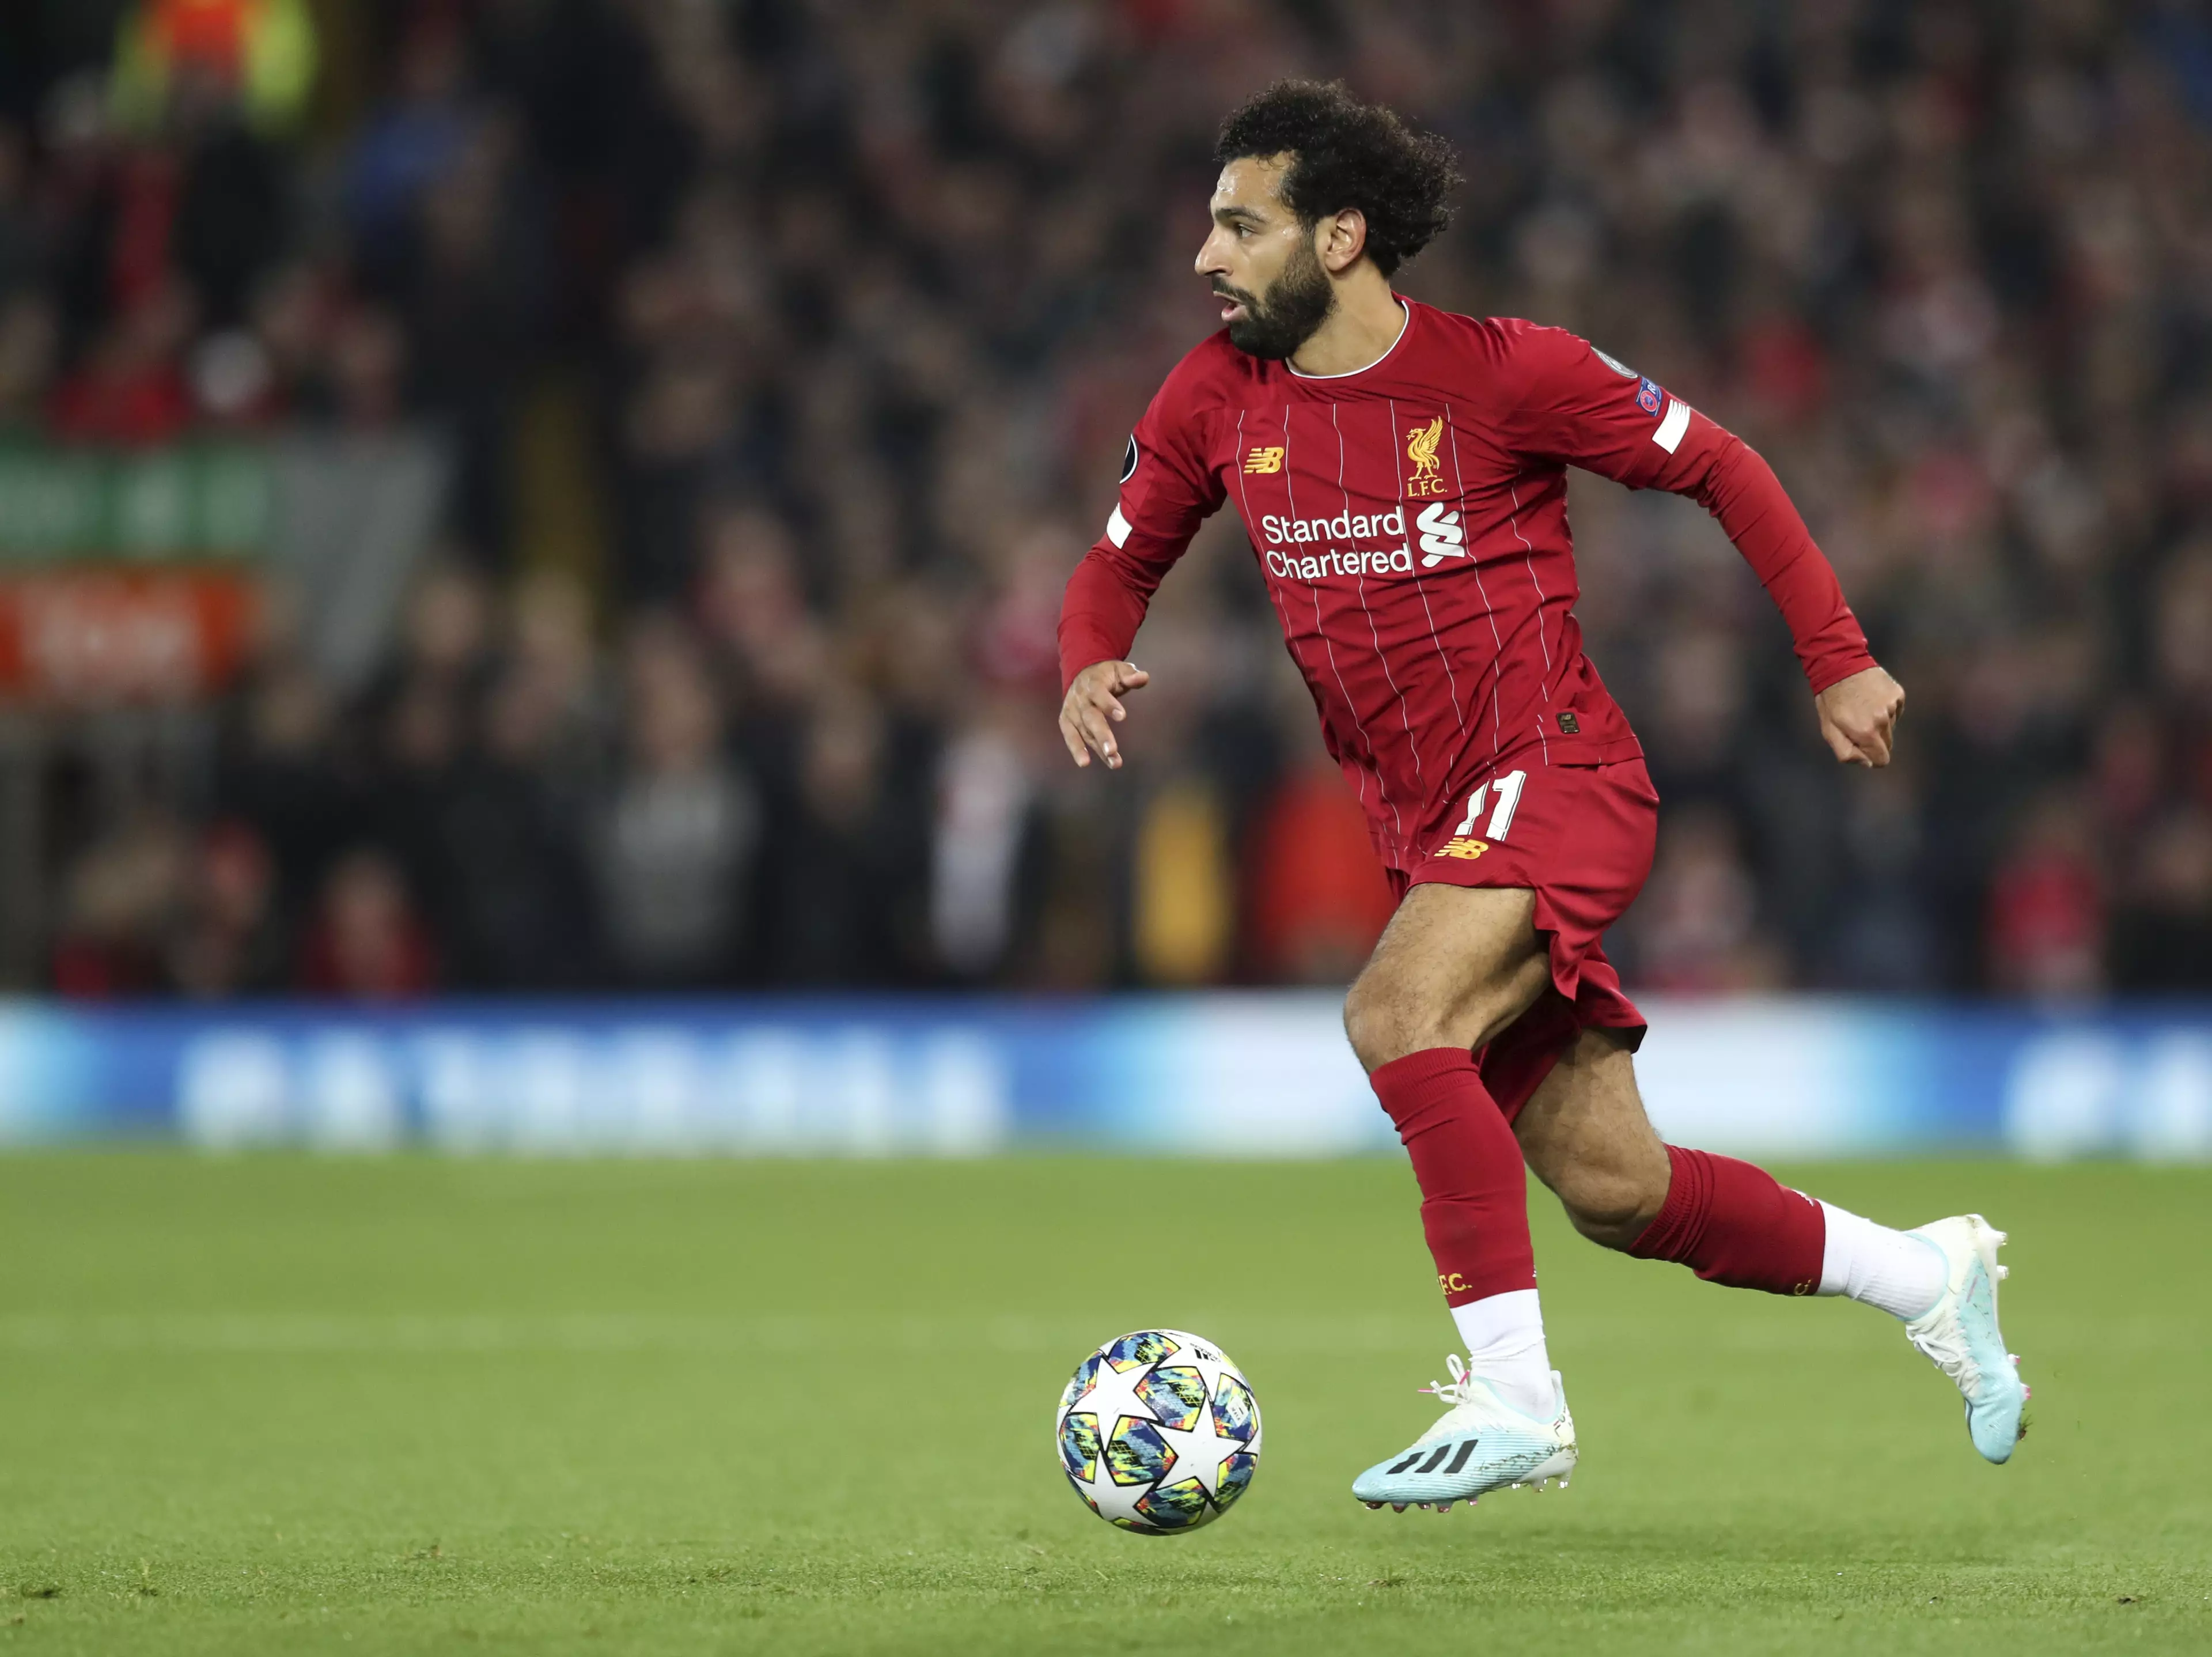 Mo Salah joined Liverpool in 2017 and has become one of the world's best players